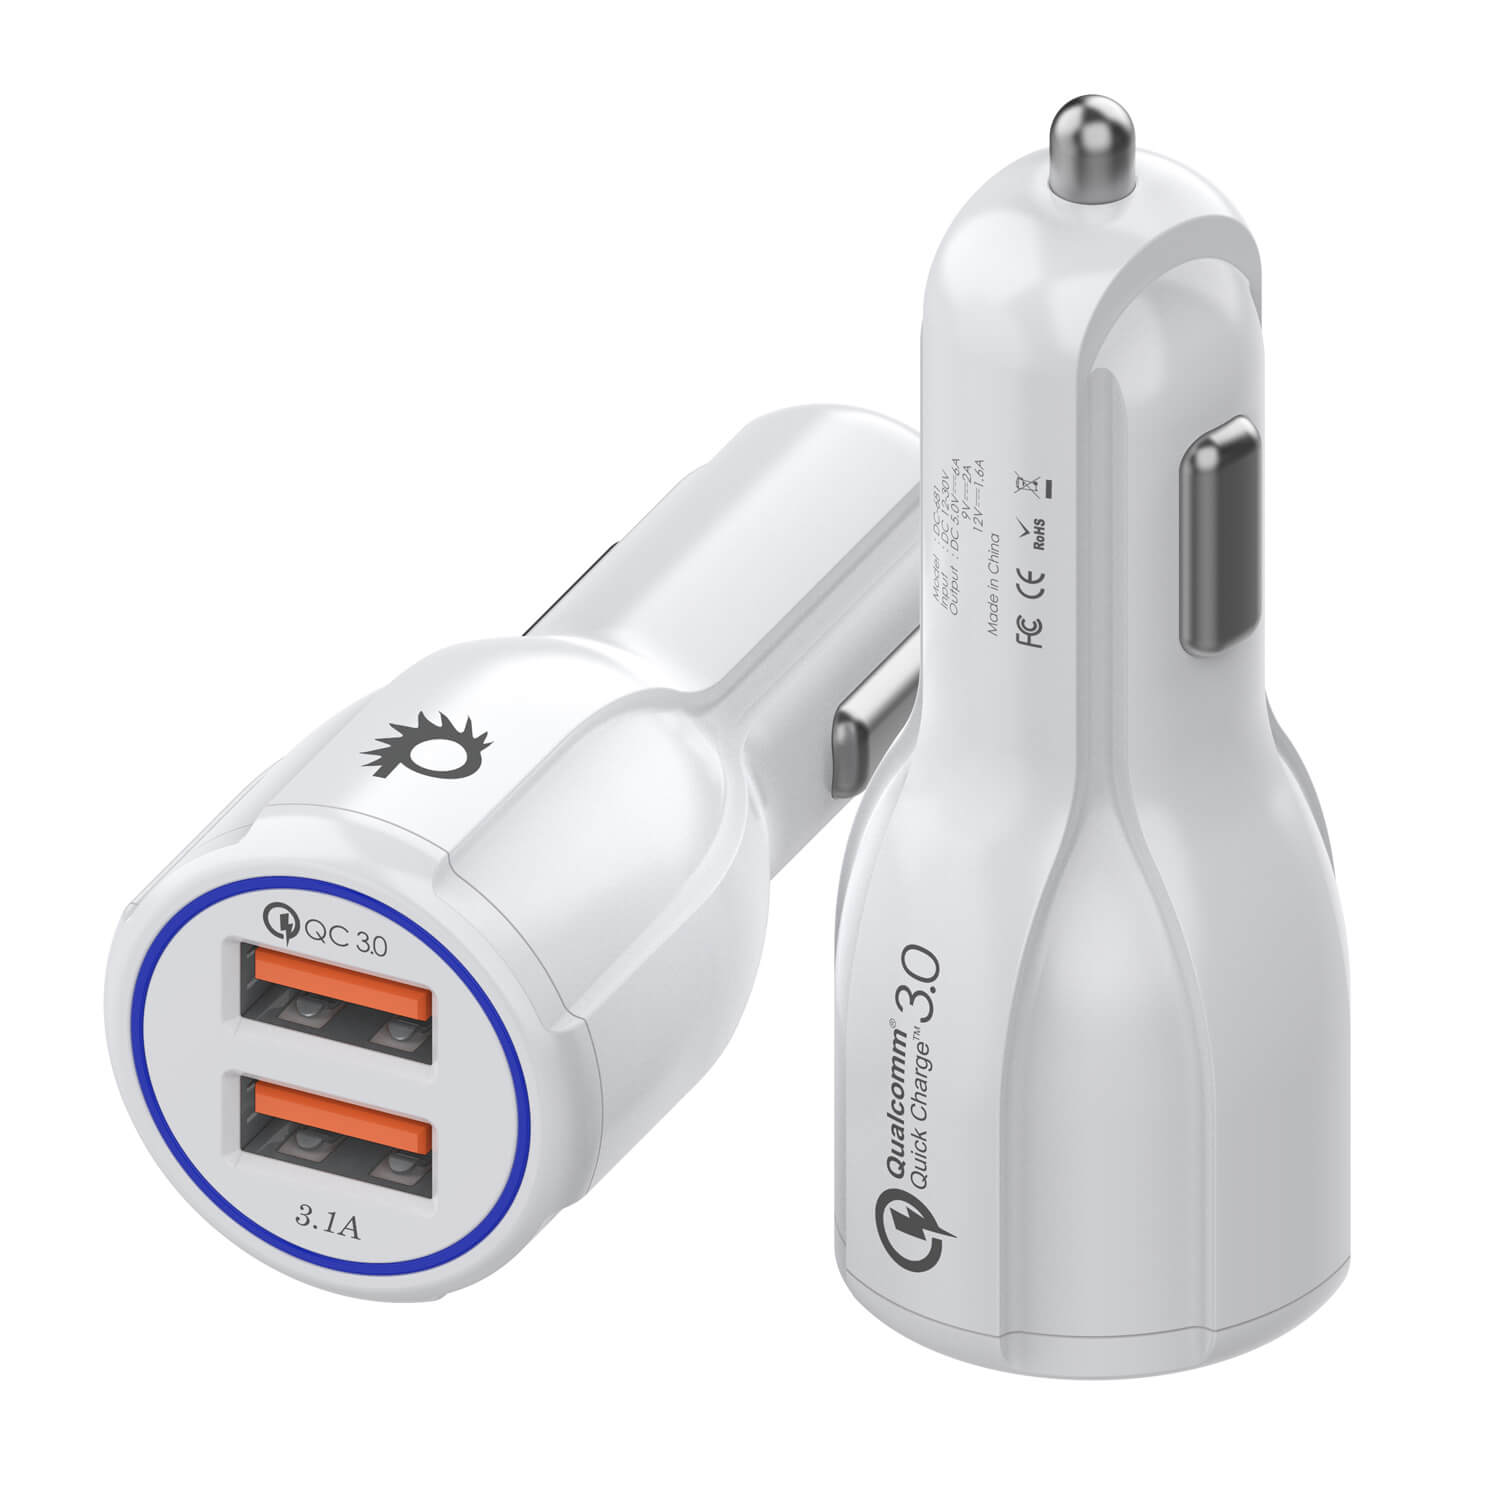 Ghostek® NRGcharge QuickCharge 2.0 Rapid High-speed Fast Wall Car White Charger w/ Micro USB Cable